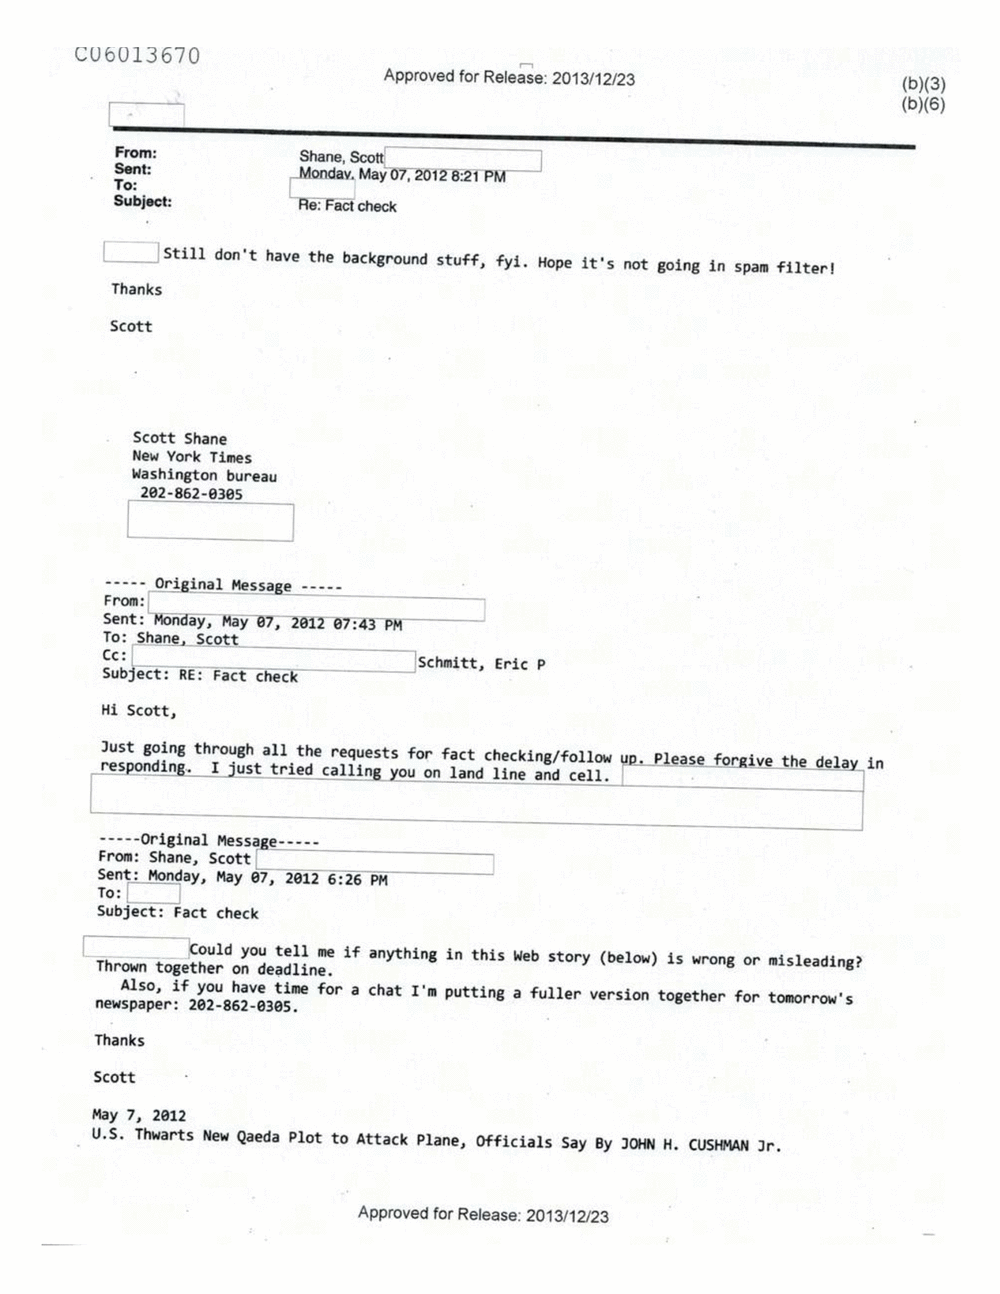 Page 518 from Email Correspondence Between Reporters and CIA Flacks